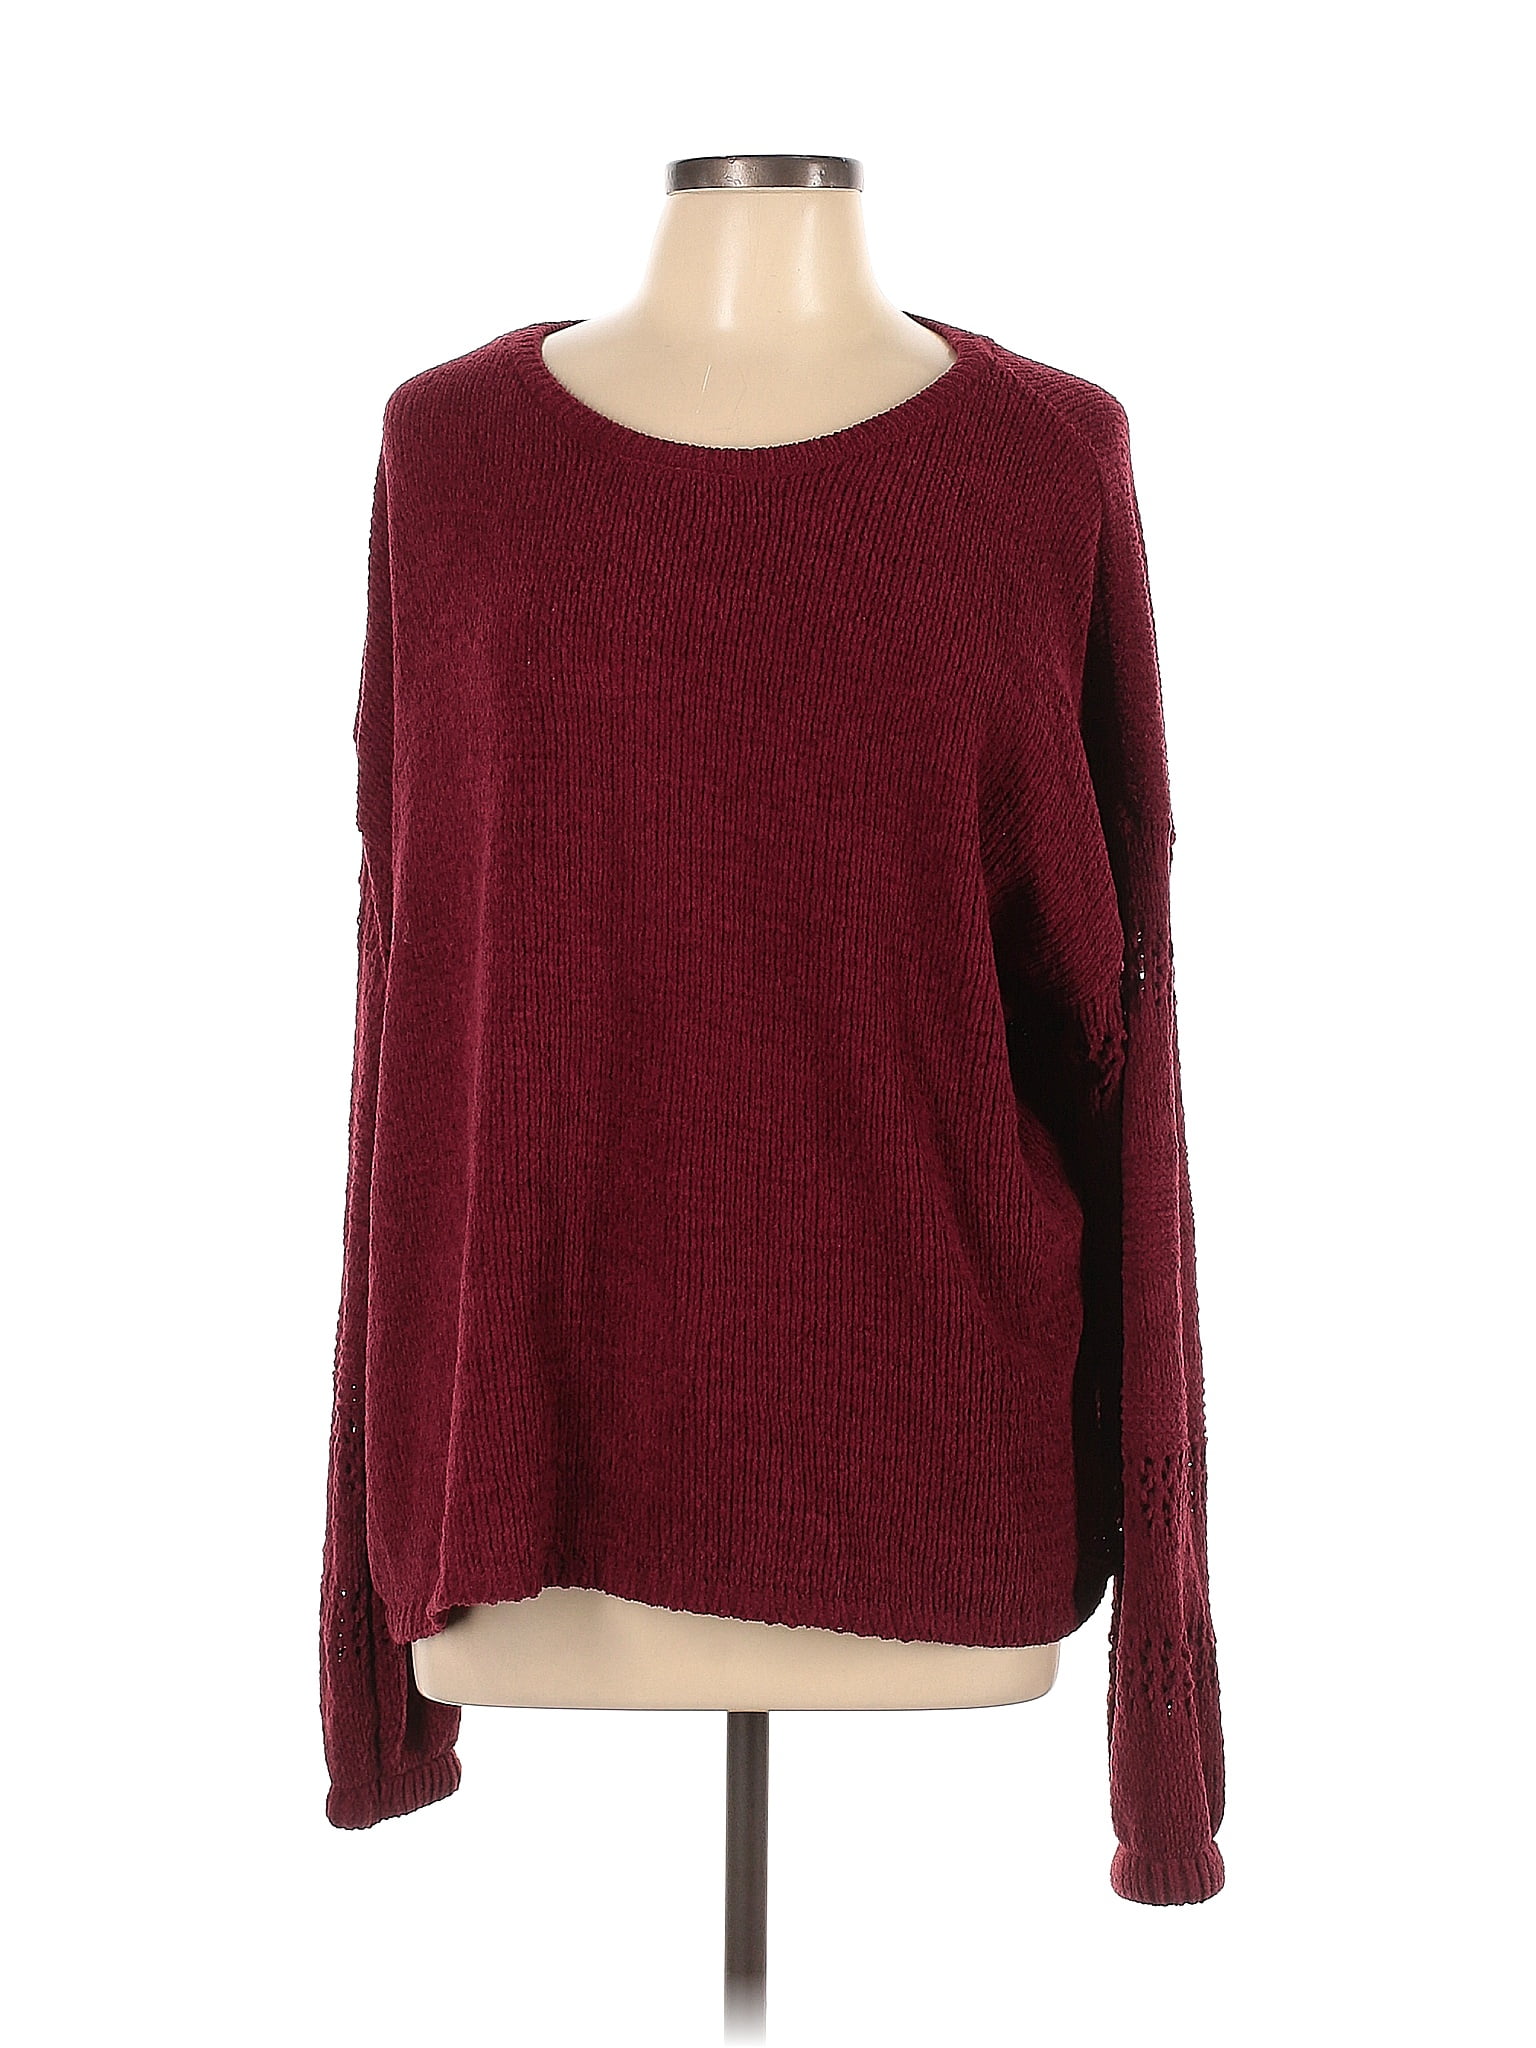 Women's Crewneck Pullover Sweater - Knox Rose Red XL